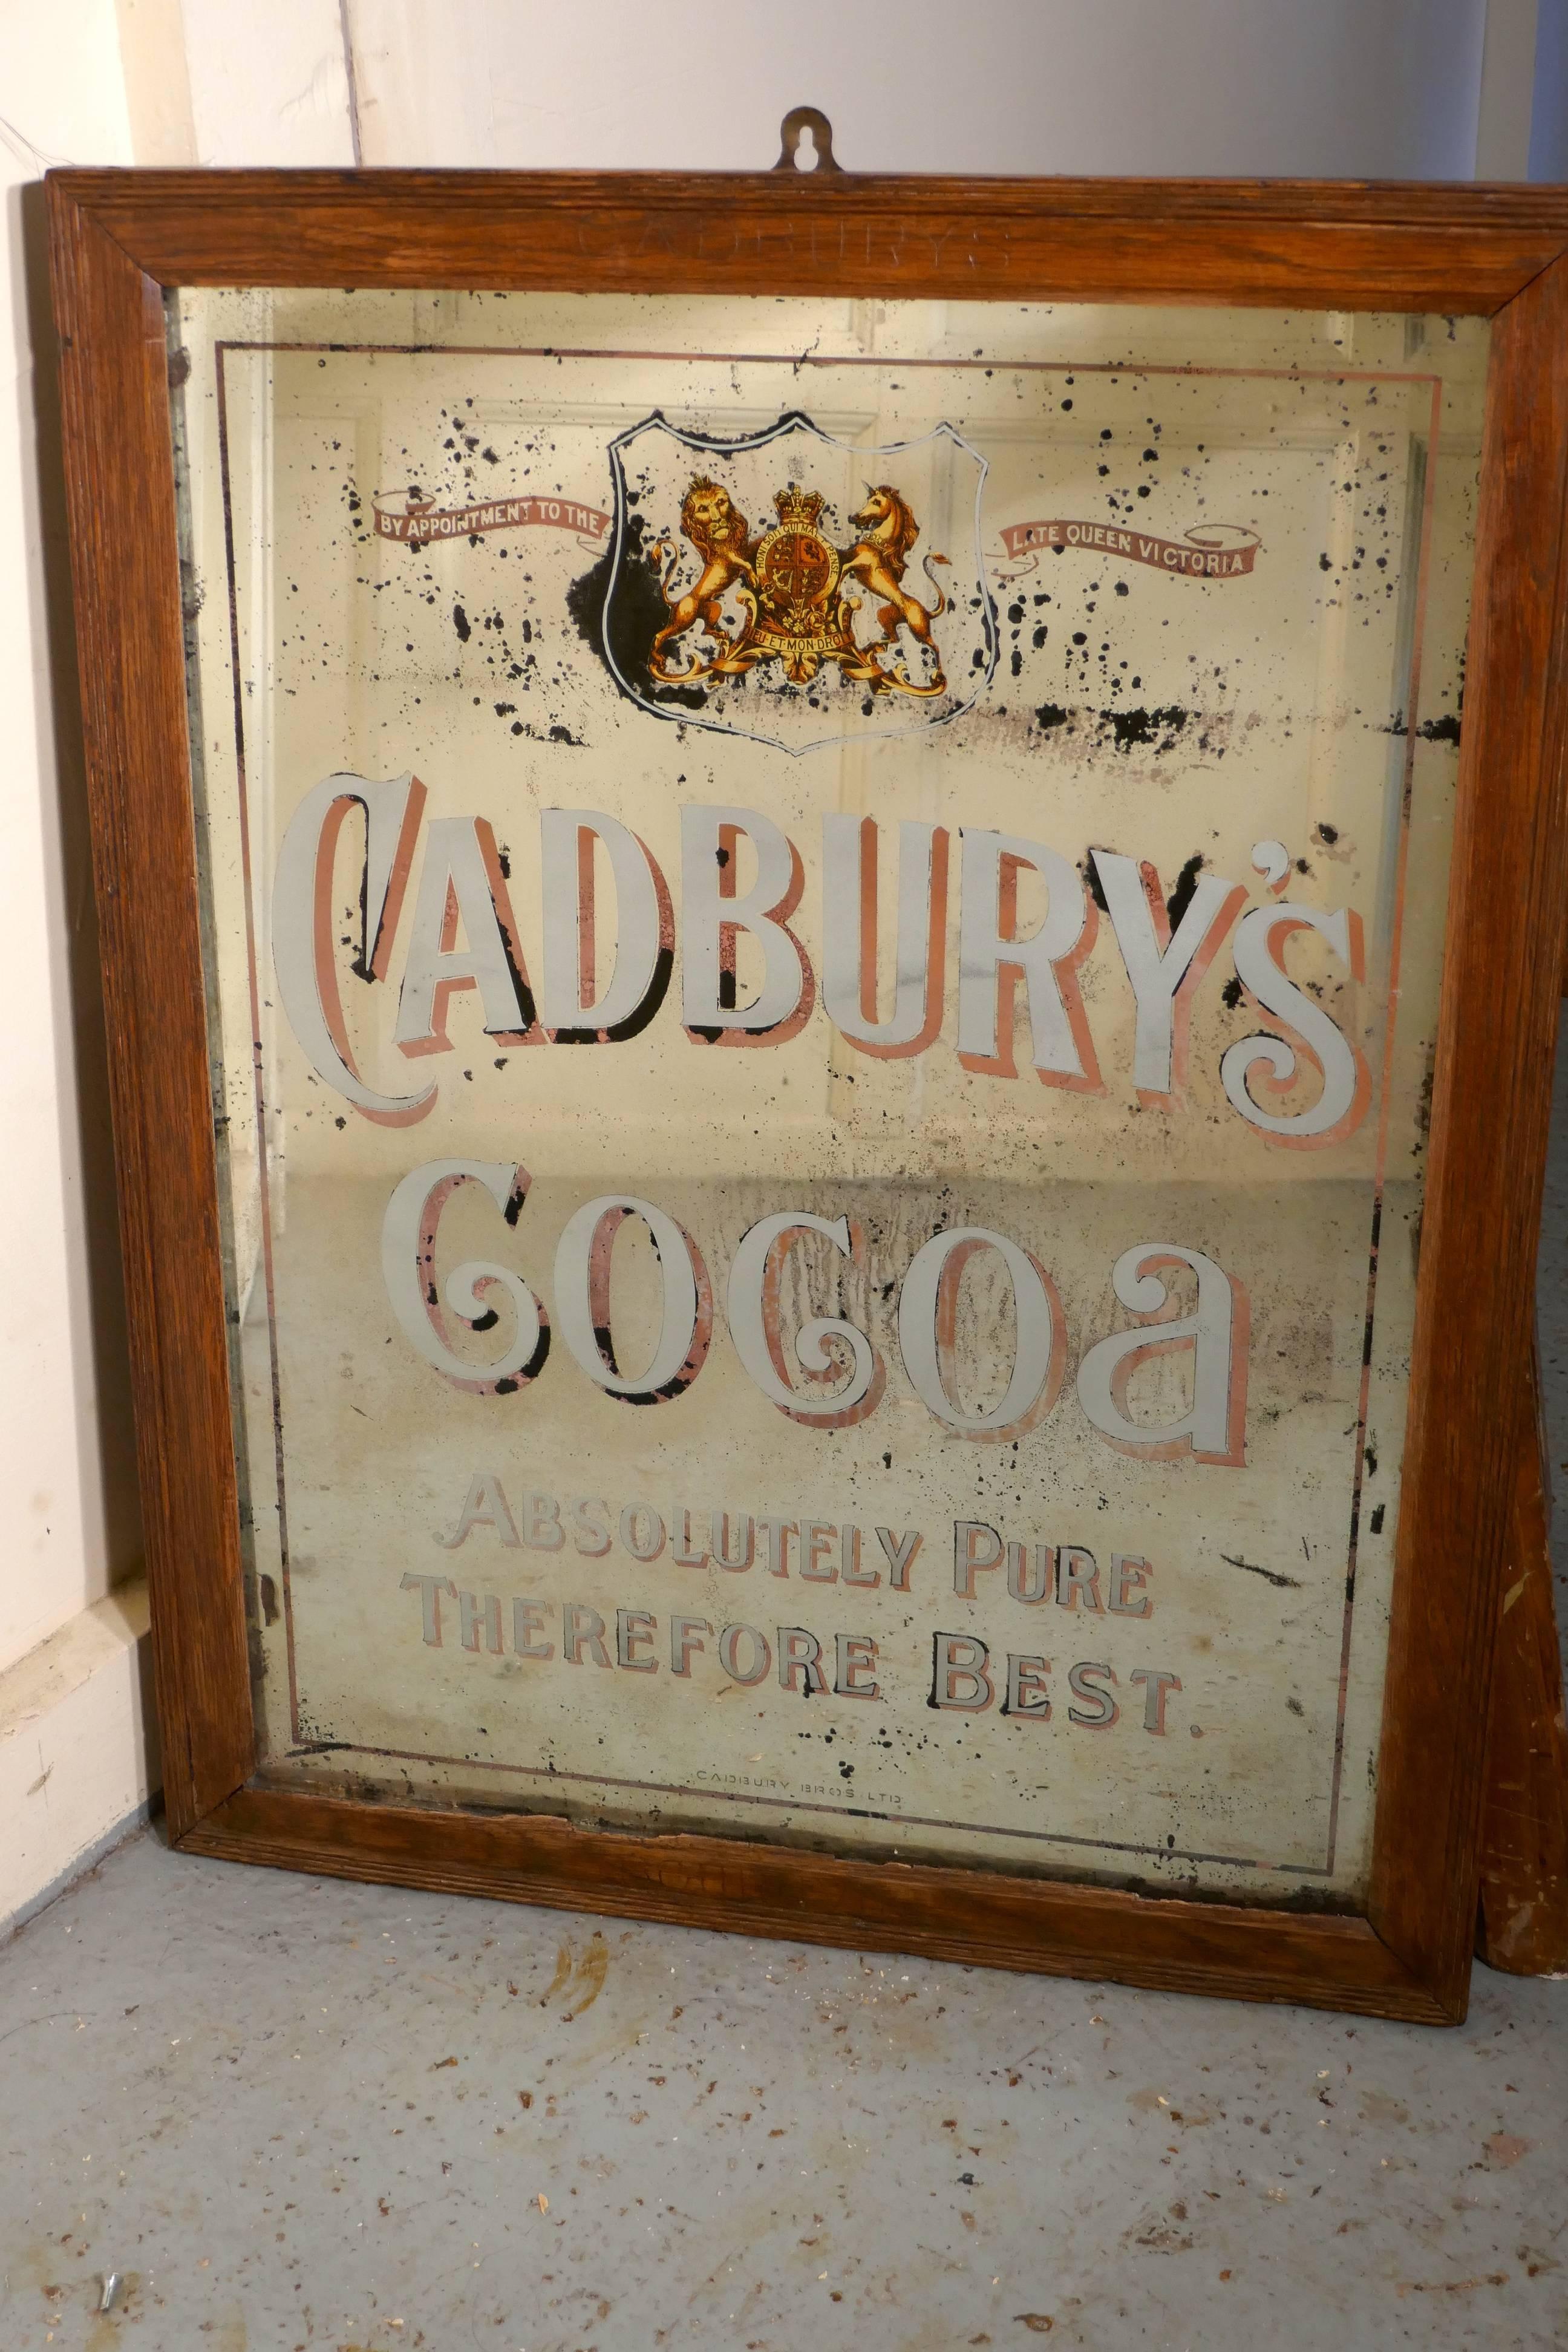 Large Cadbury’s Cocoa Advertising Mirror, Royal Appointment to Queen Victoria 1